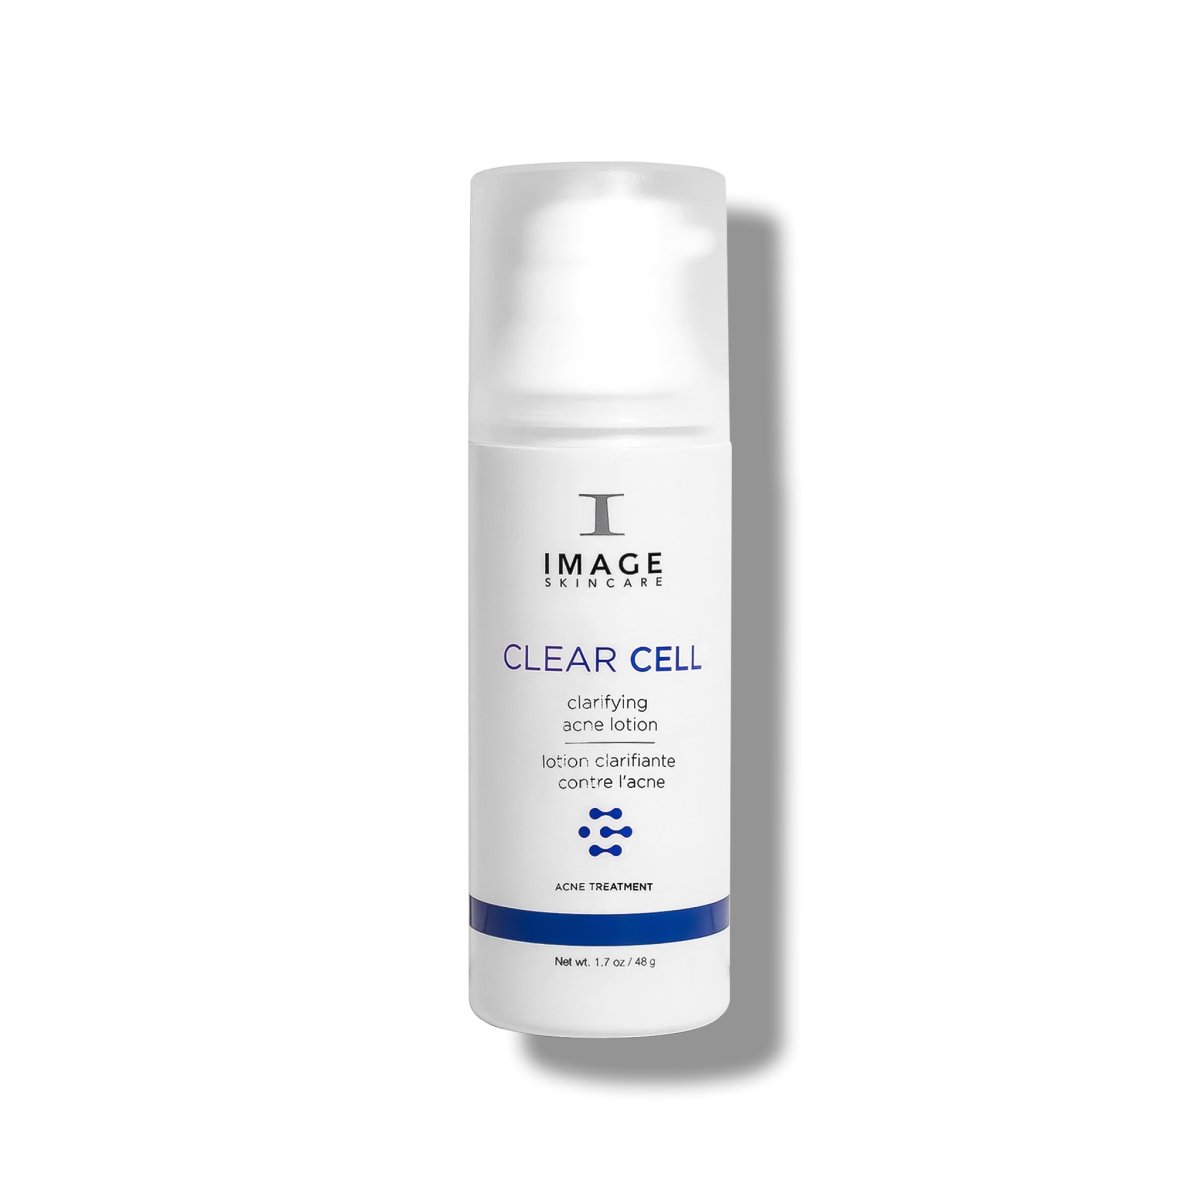 Image Skincare Clear Cell Clarifying Acne Lotion 1.7 oz